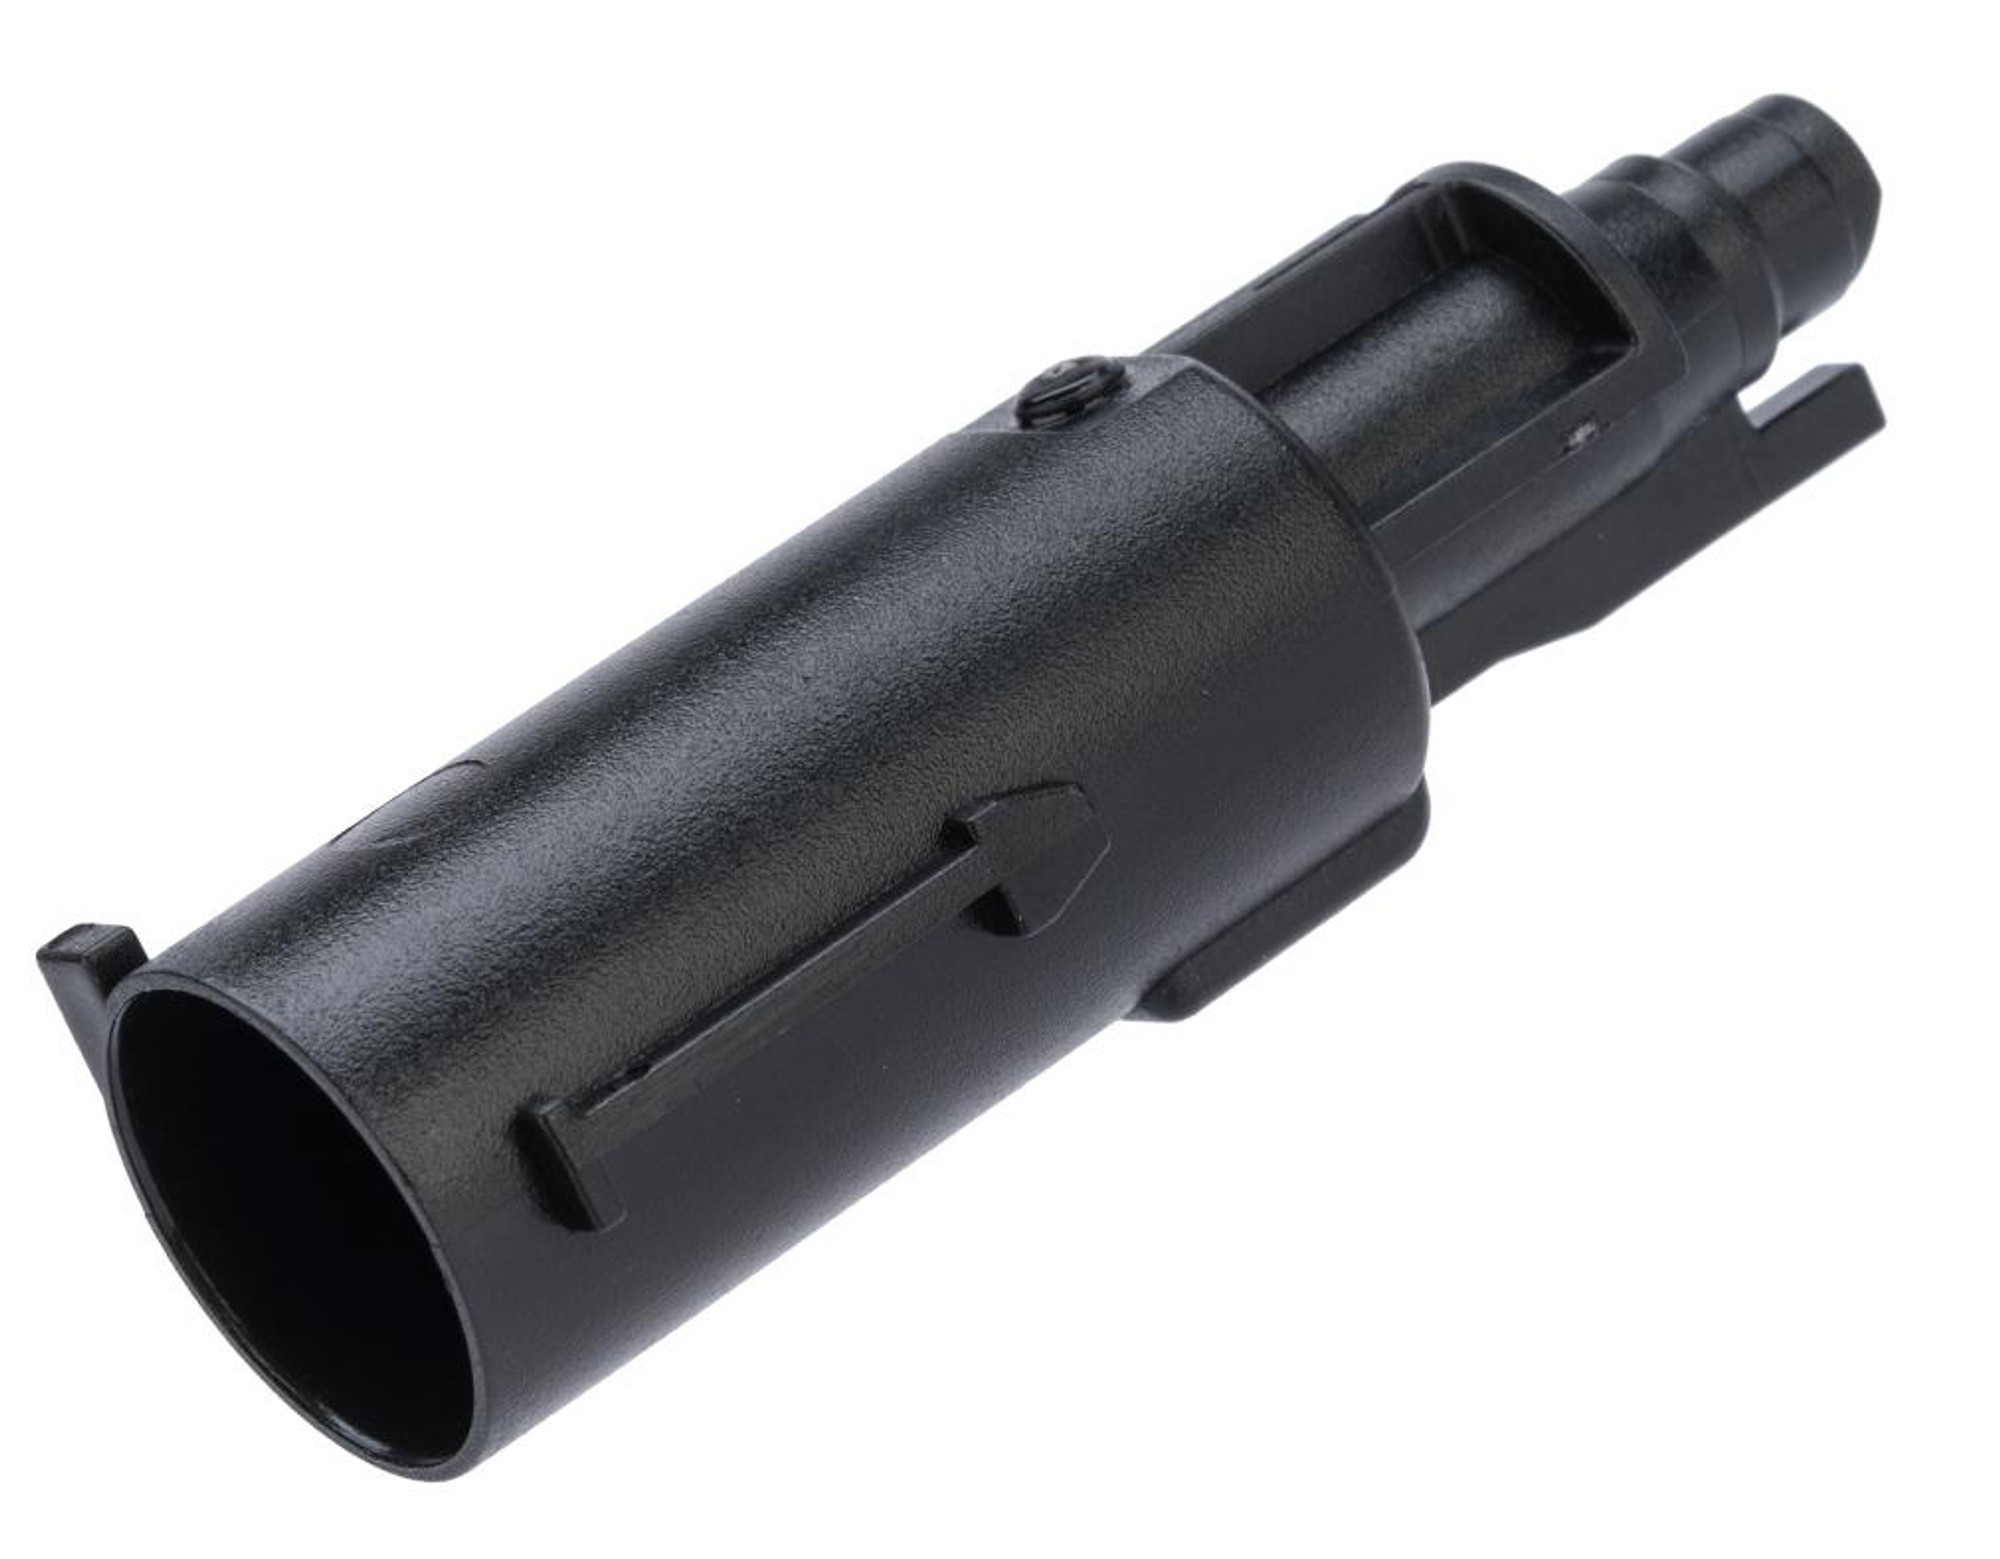 ICS Replacement Loading Nozzle for BLE Series Gas Blowback Pistols